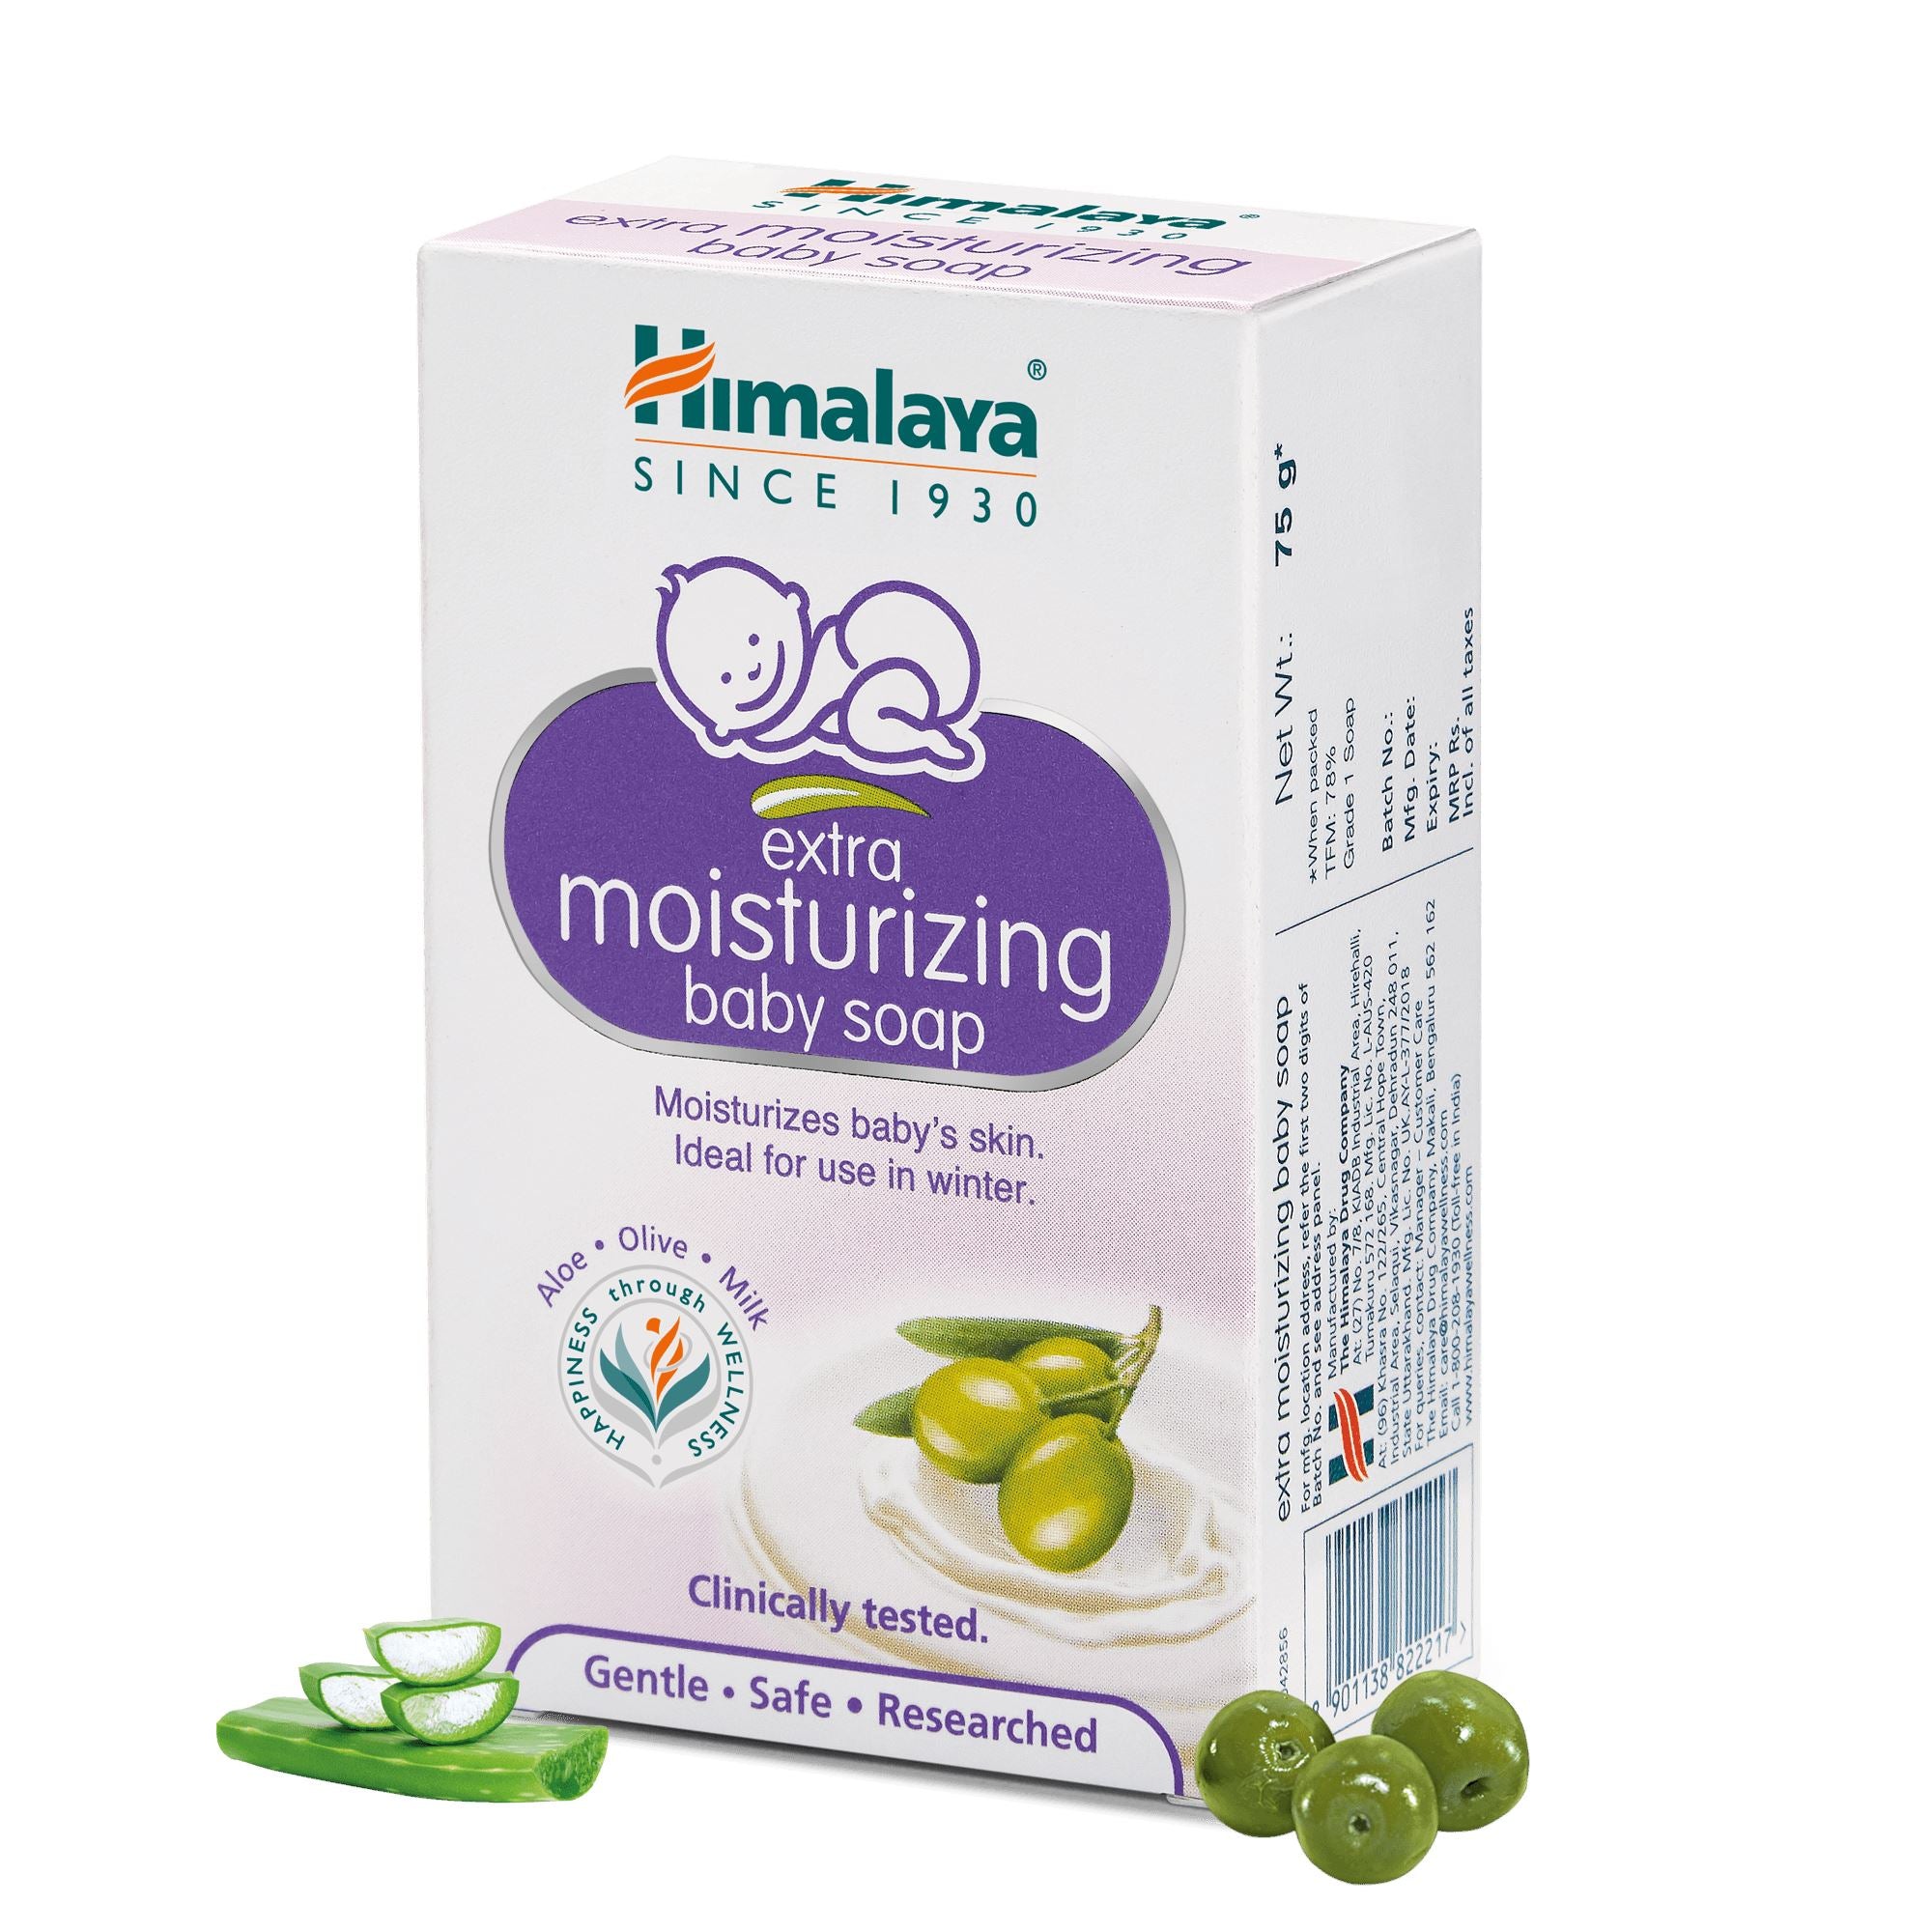 Himalaya extra moisturizing baby soap 75g- Gently cleanses without causing post-bath dryness